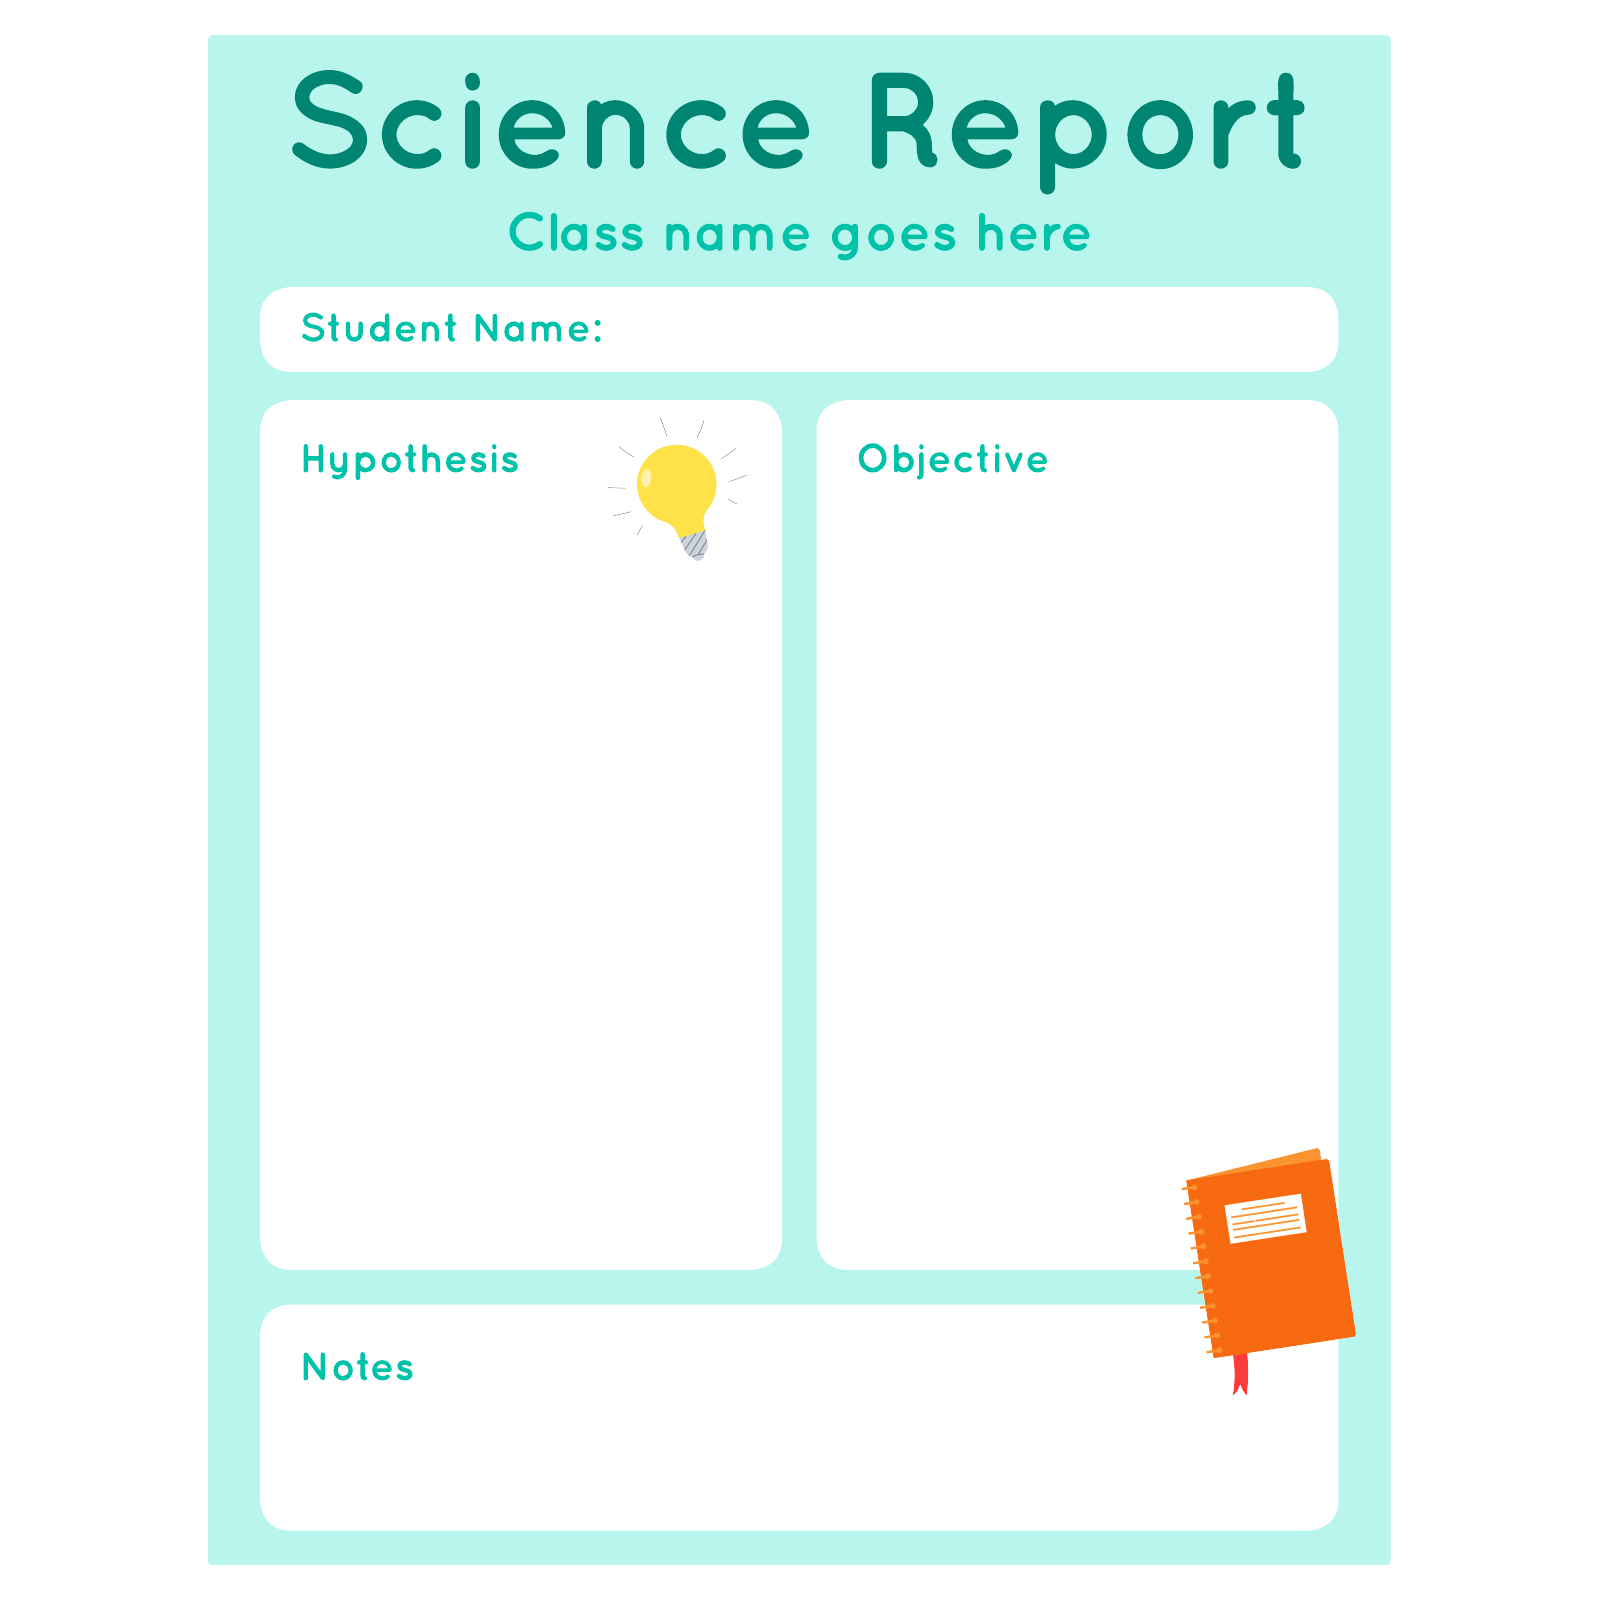 Science report example